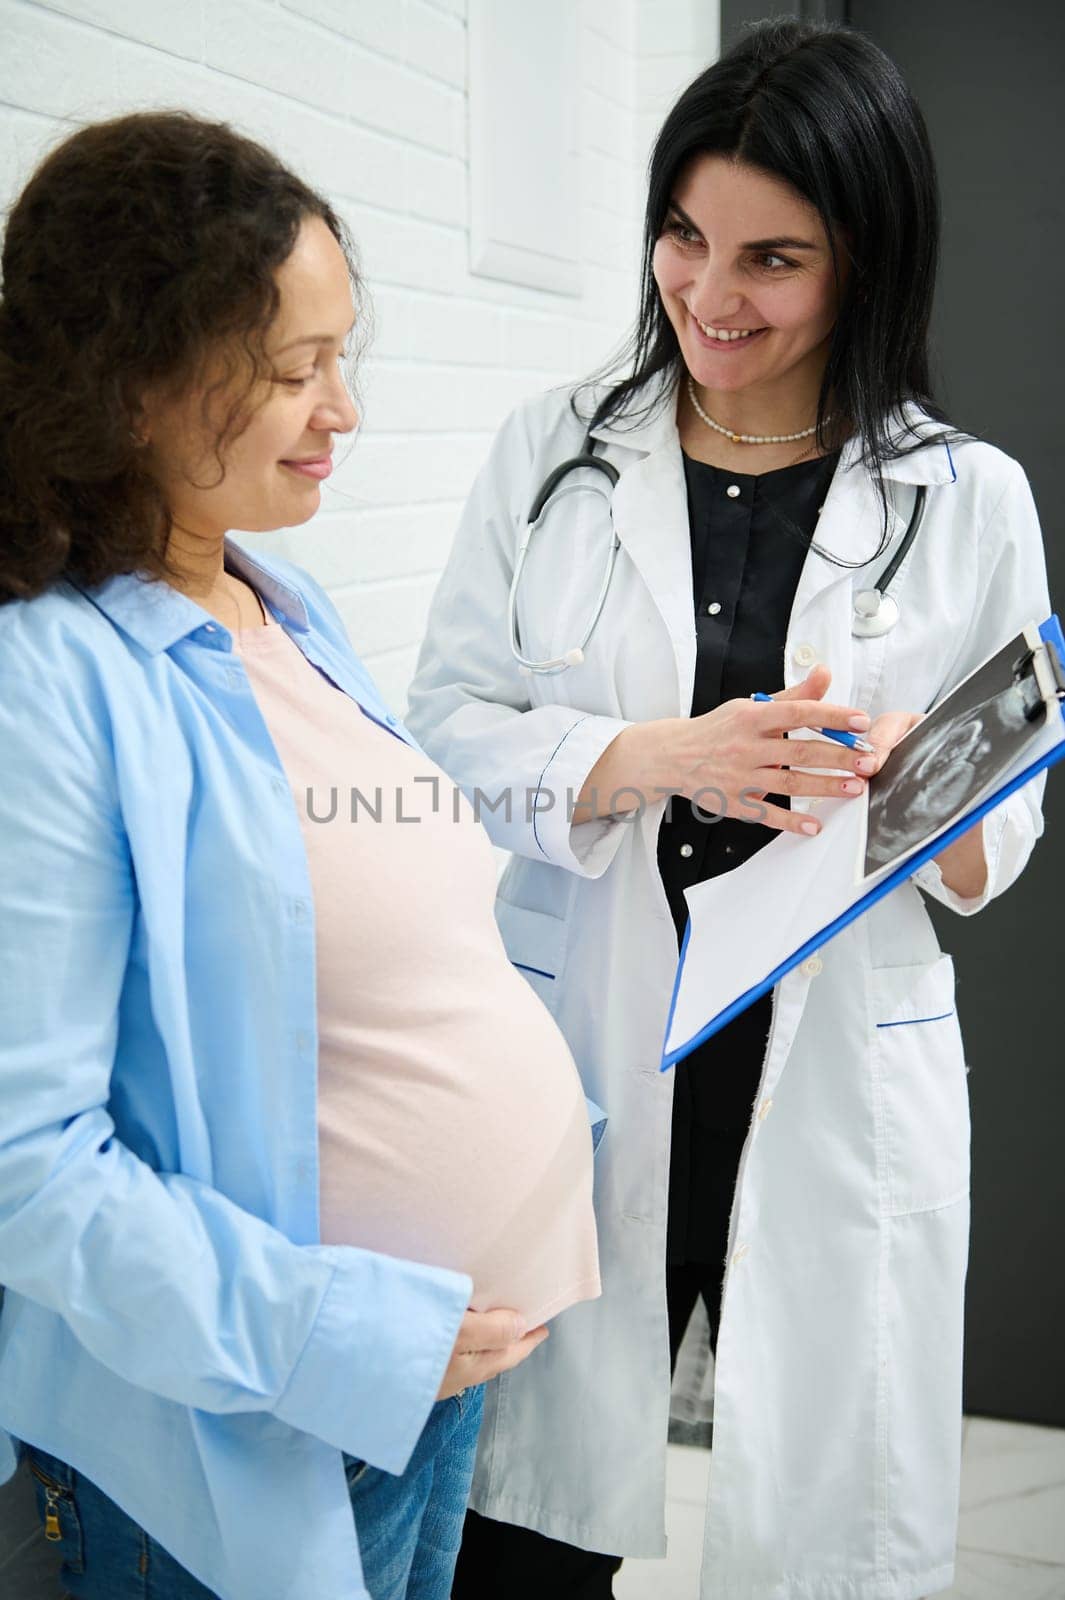 Pregnant woman visit gynecologist obstetrician doctor at maternity hospital or medical clinic for pregnancy consultation by artgf